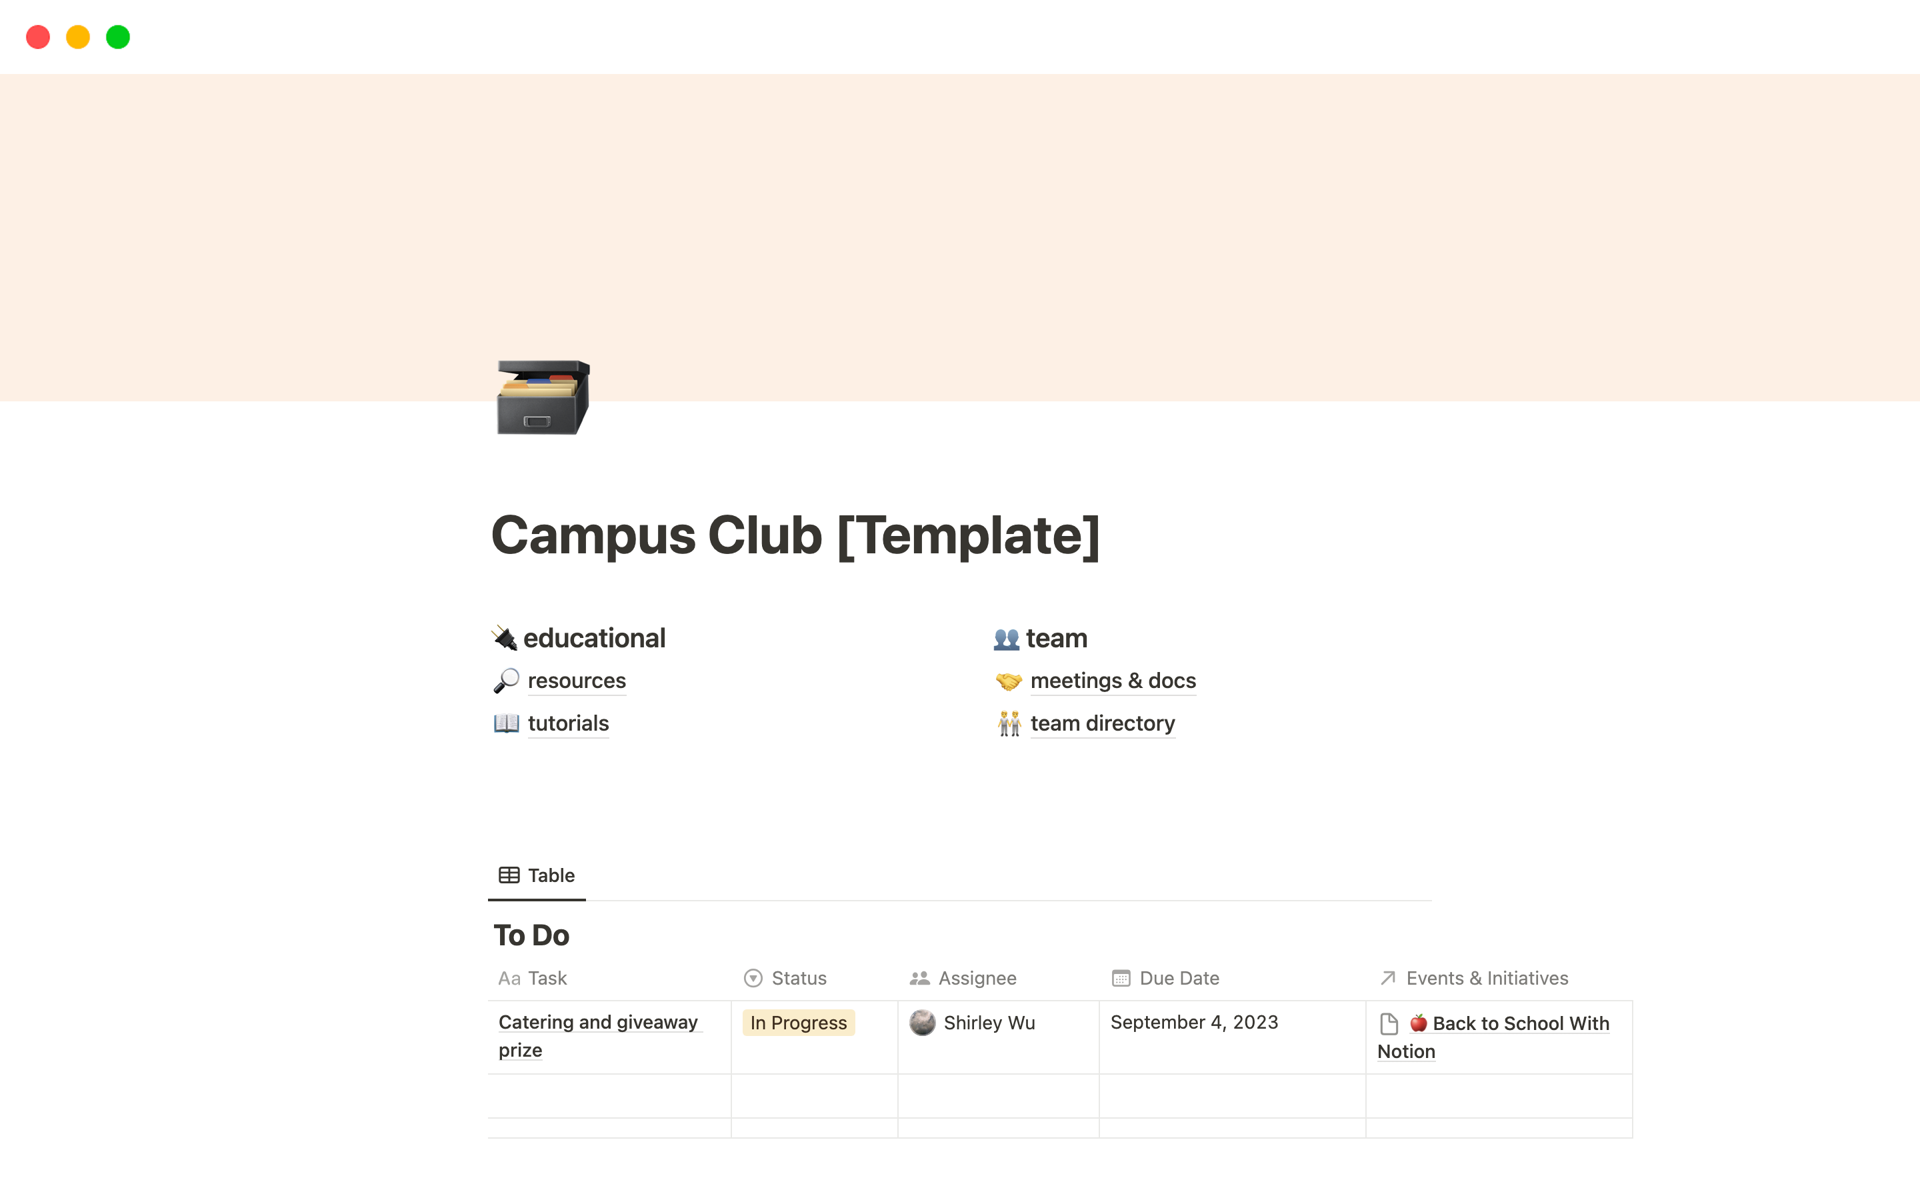 Shows a few ways student leaders can manage tasks, events, and deadlines within their own campus club organizations.